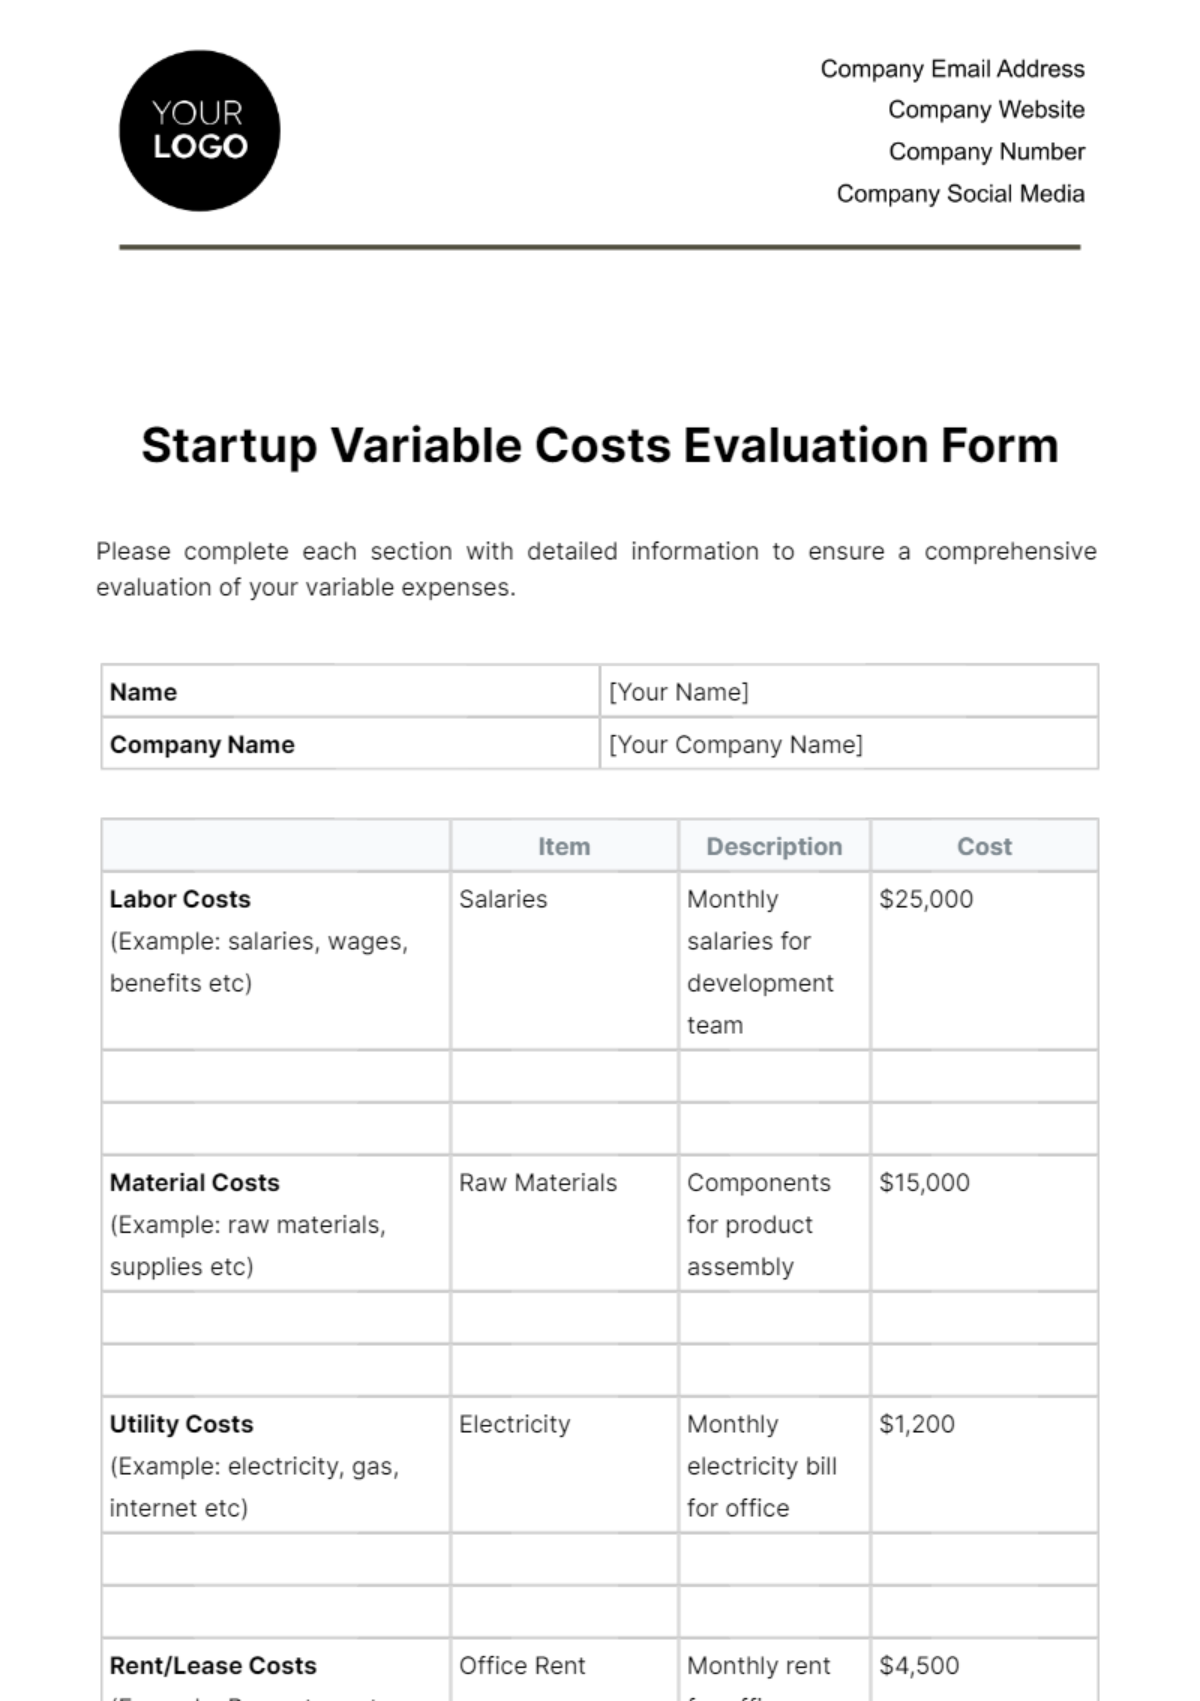 Startup Variable Costs Evaluation Form Template